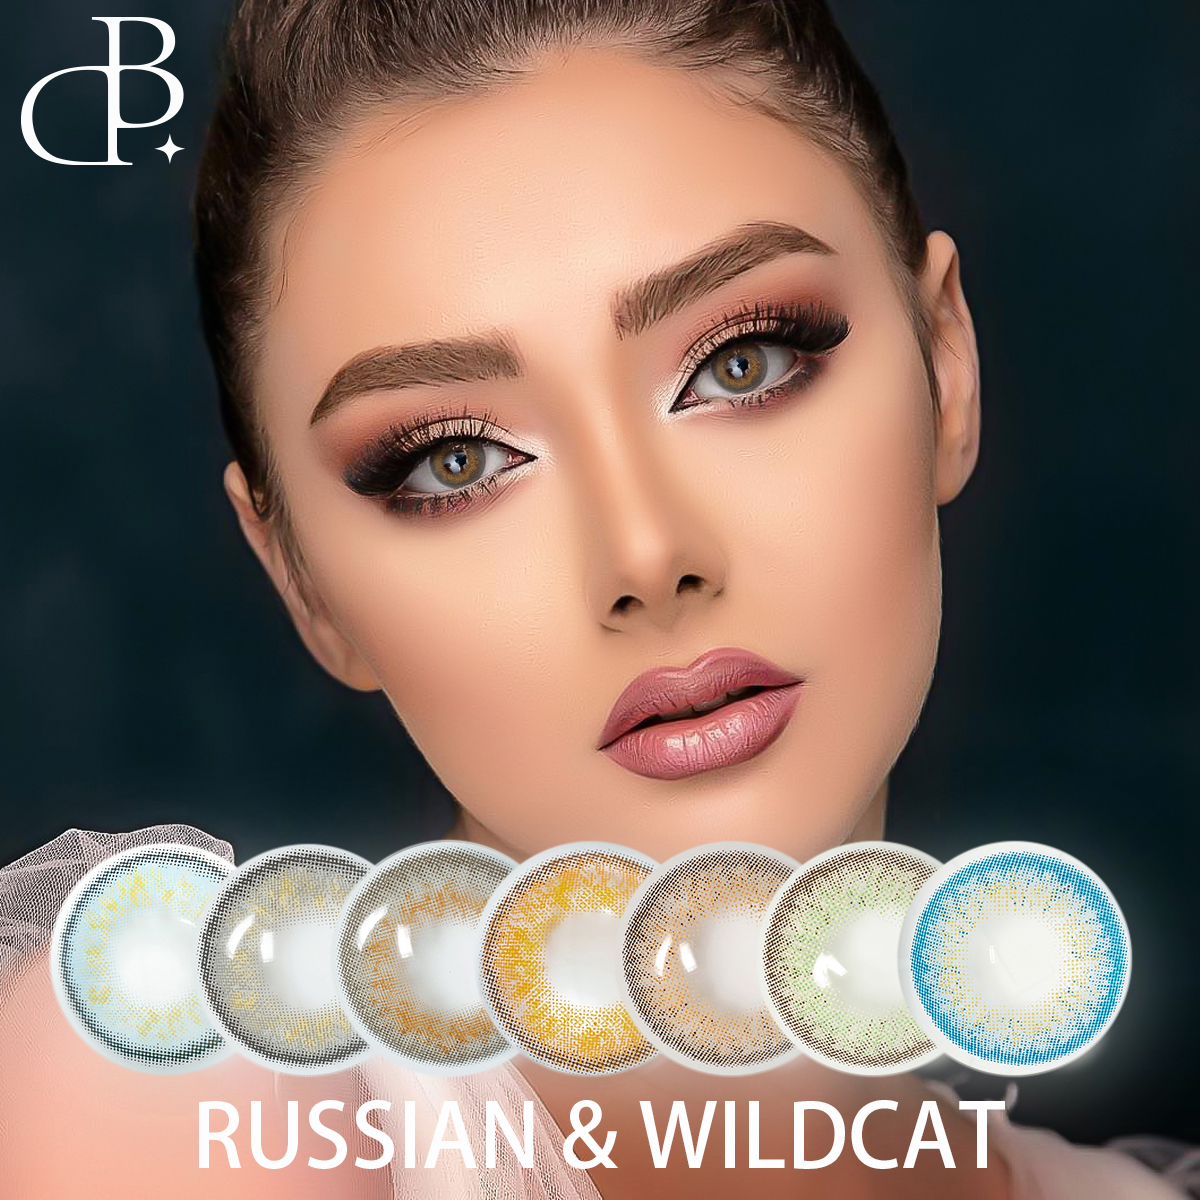 https://www.dblenses.com/russianwild-cat-natural-colored-eye-lenses-wholesale-soft-colored-contact-lenses-prescription-contact-linses-free-shipping-product/